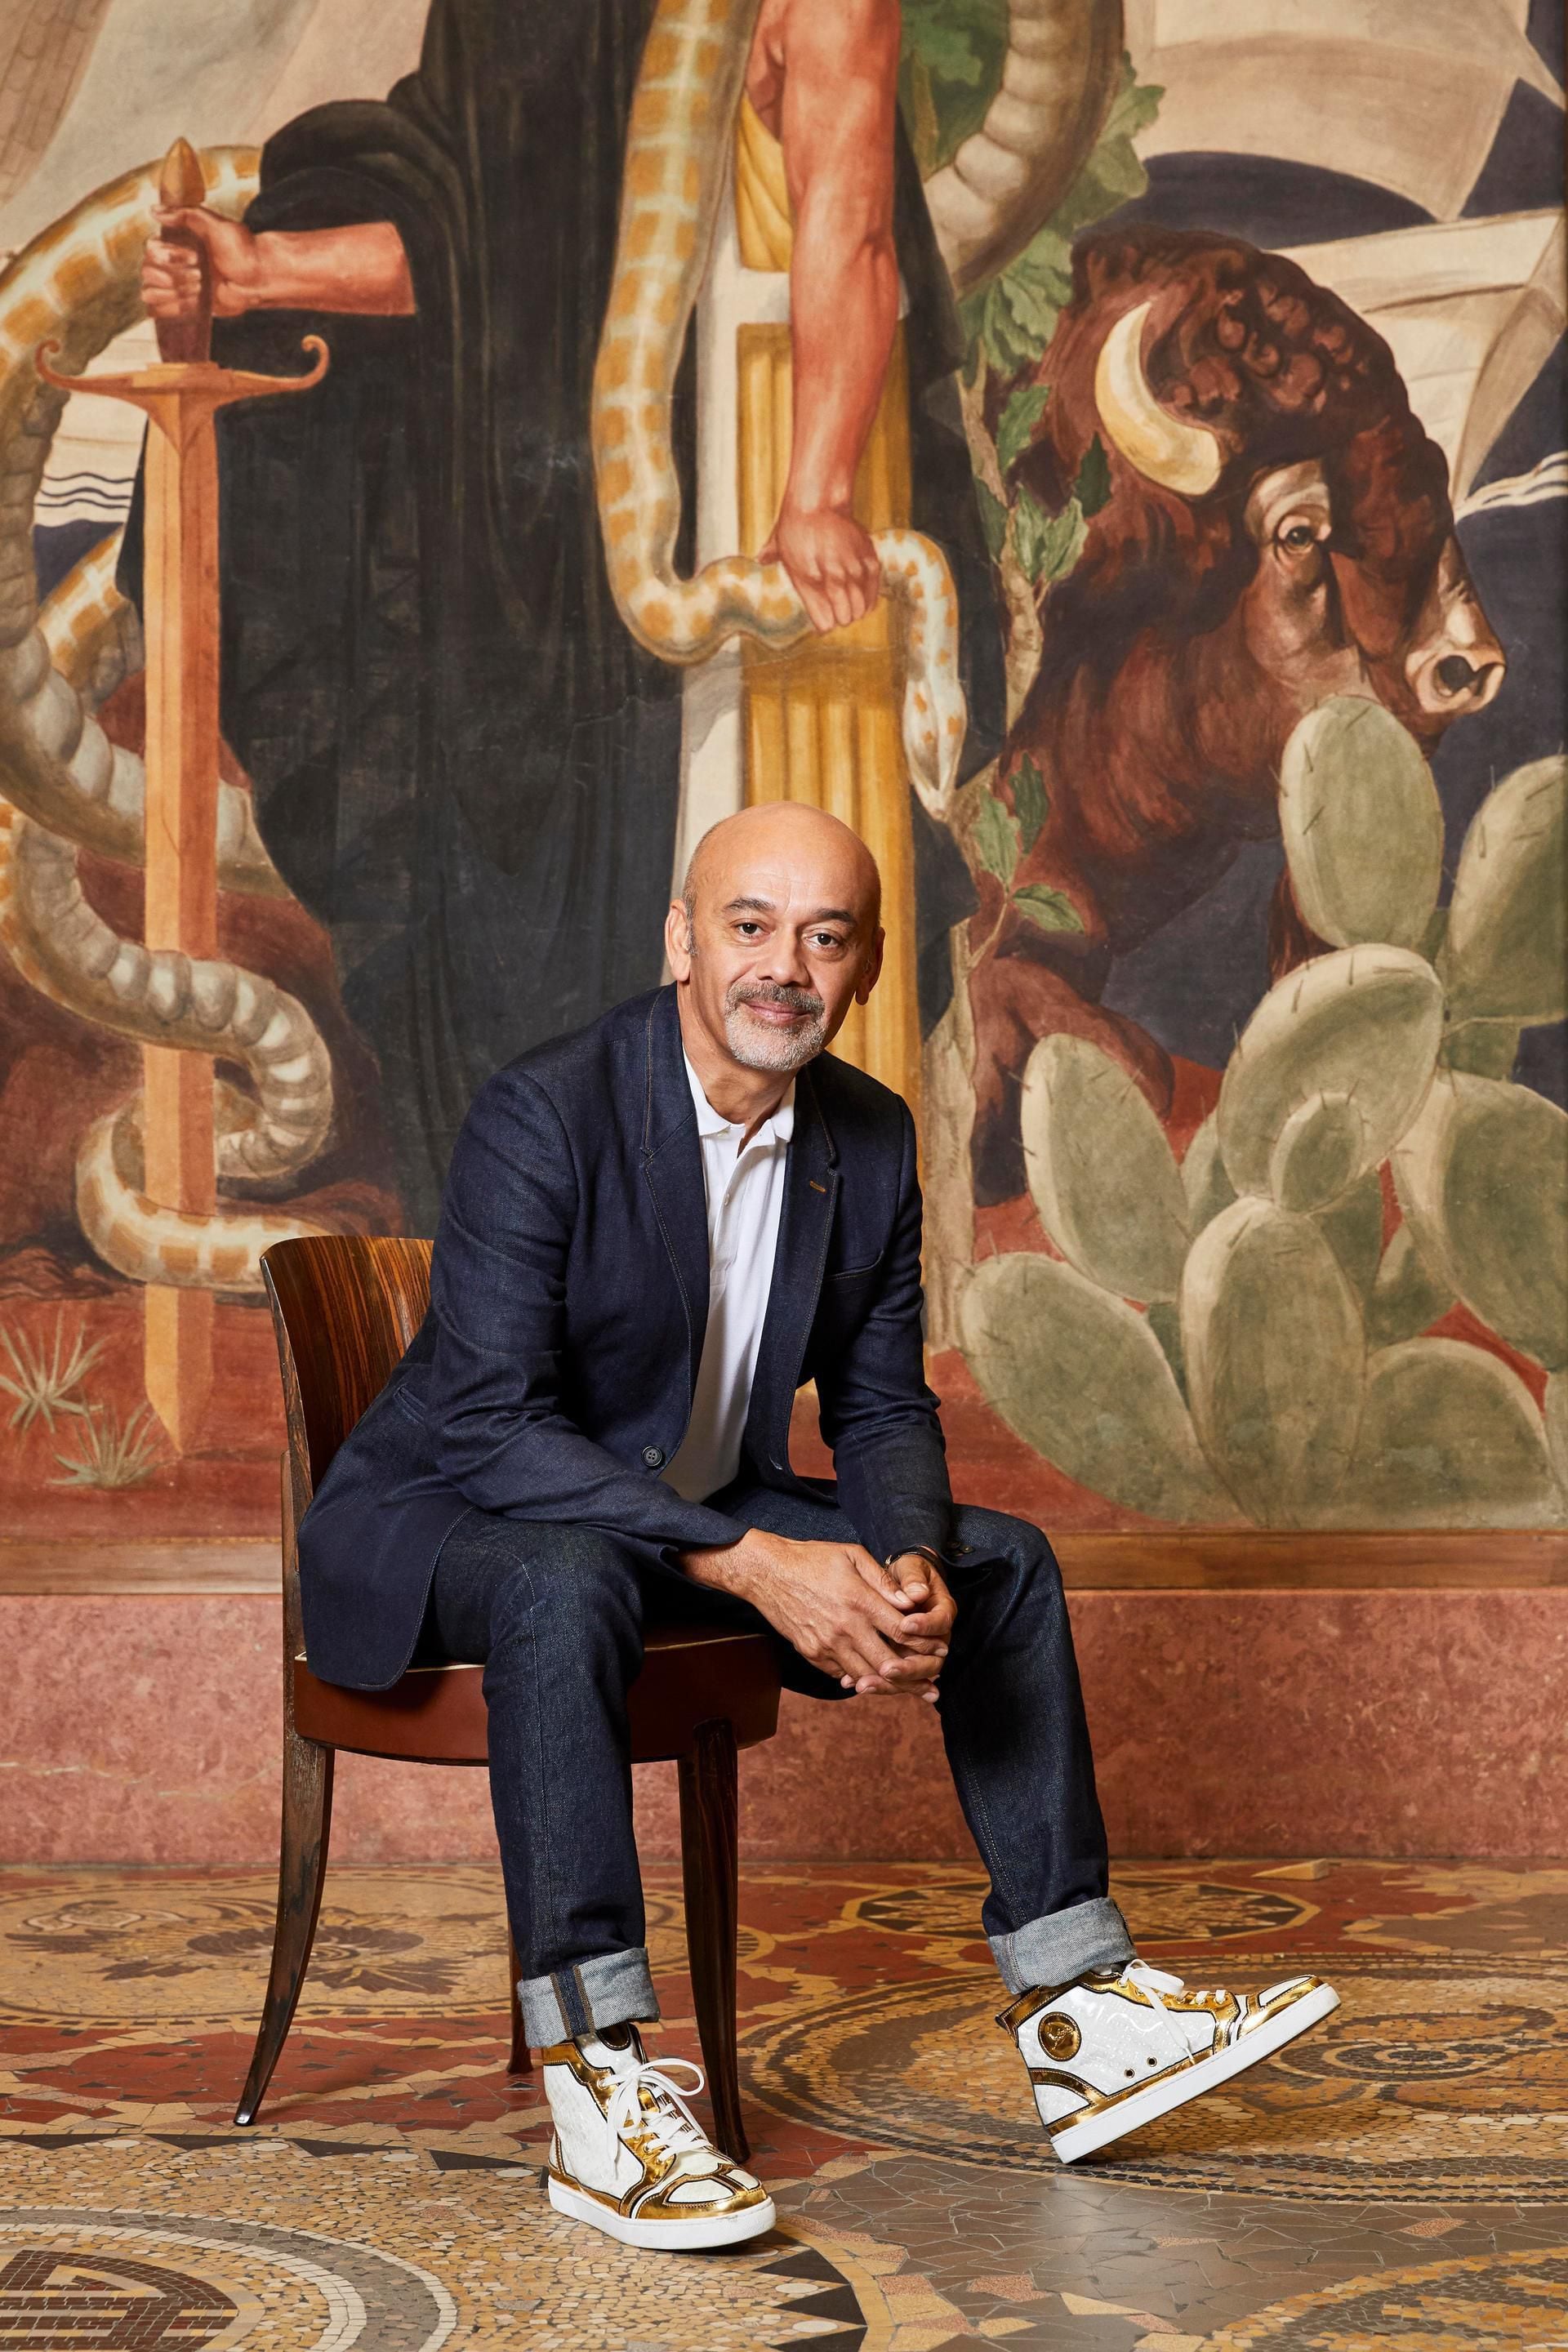 What Is French shoe designer Christian Louboutin's net worth?